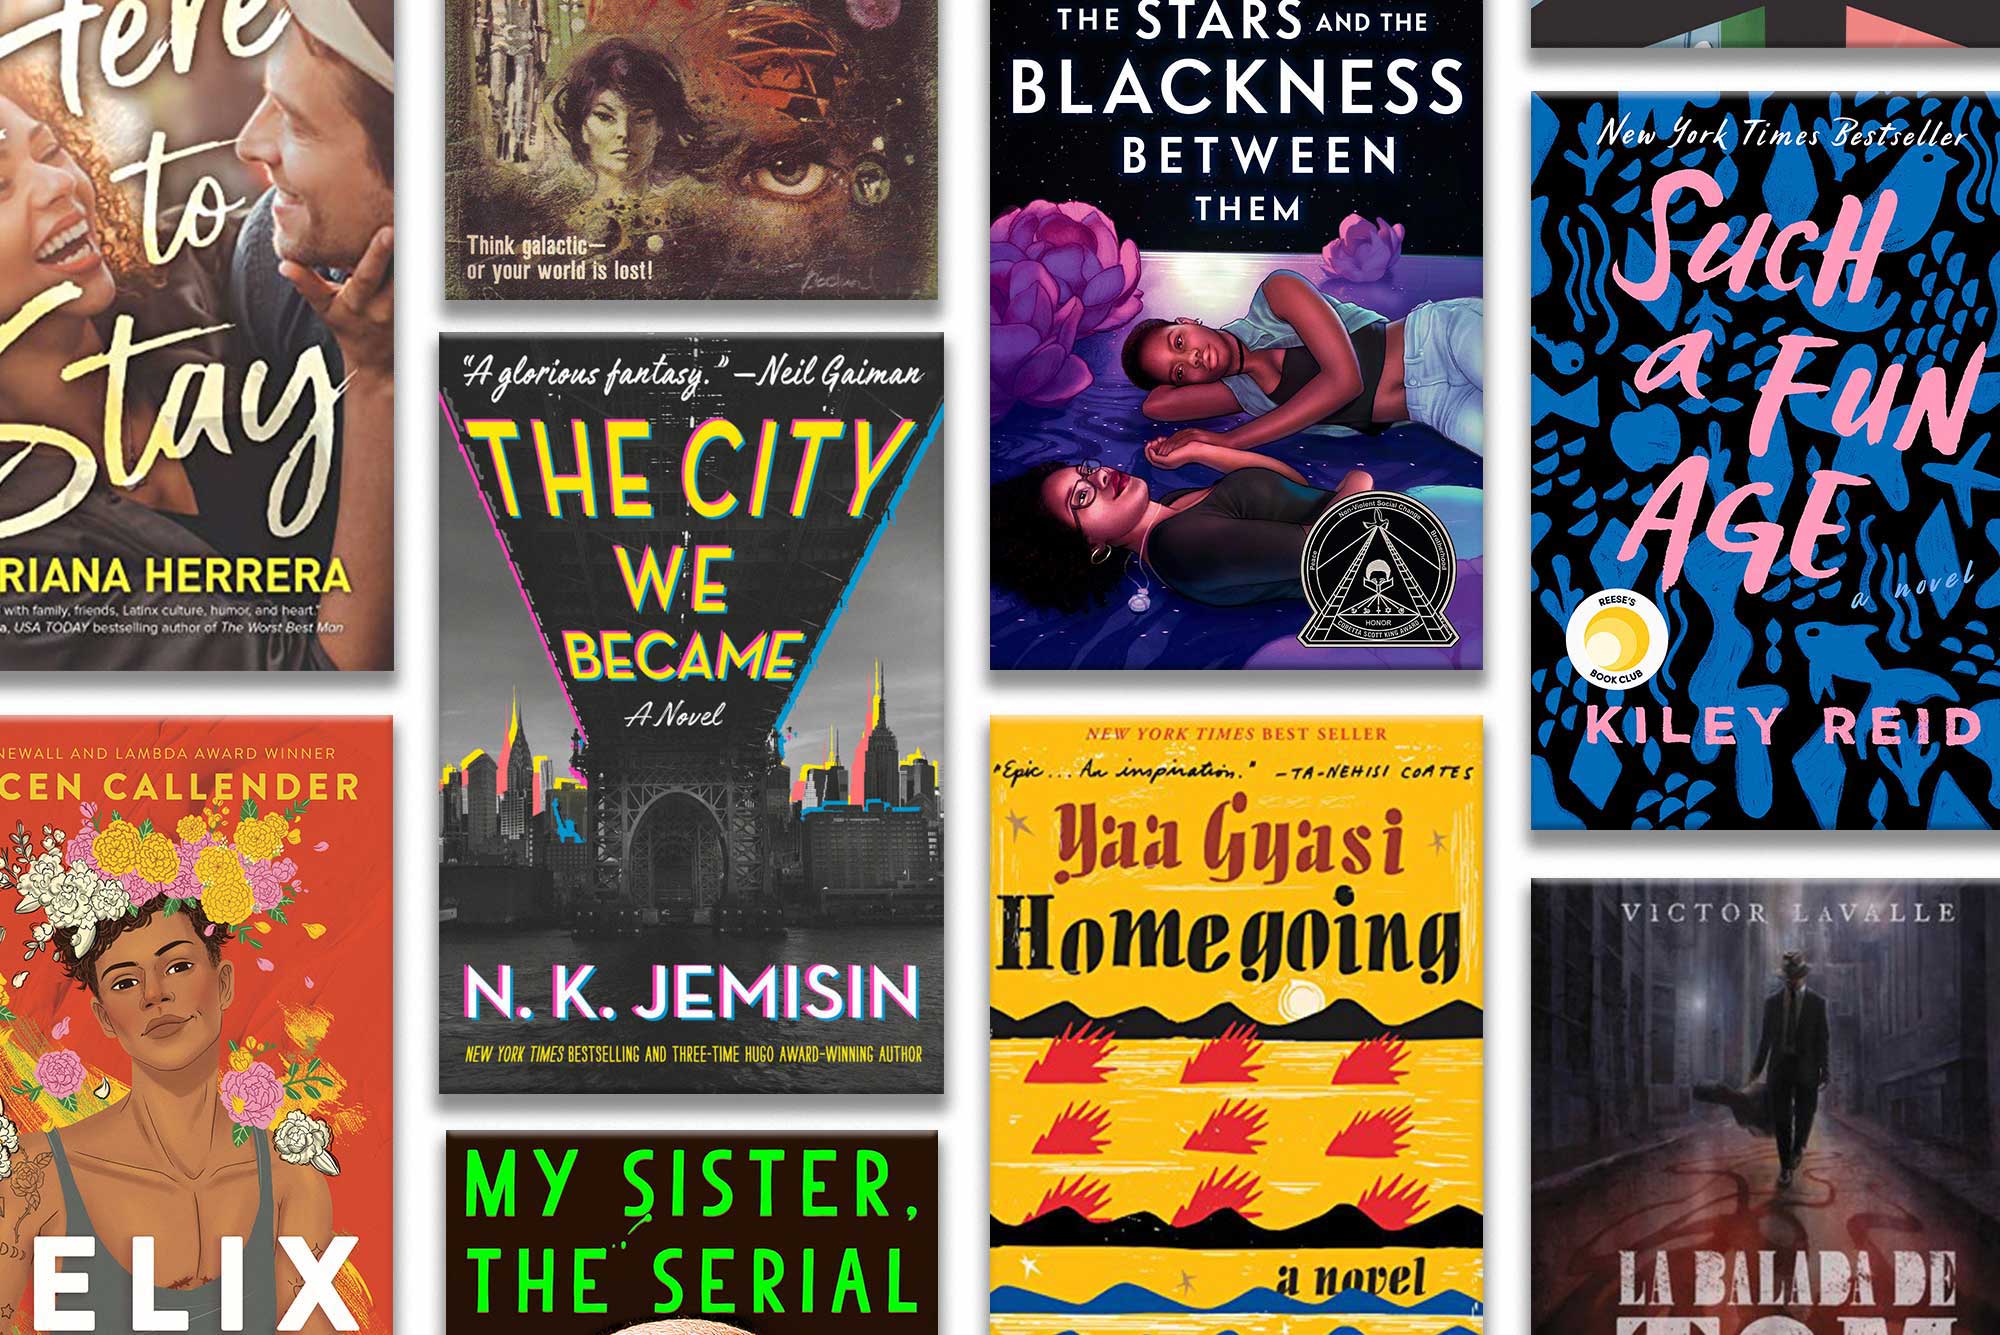 Composite image of the book covers of the following works (right to left): Here to Stay, The Stars and the Blackness Between Them, Such a Fun Age, Felix, The City We Became, Yaa Gyasi’s Homegoing, and partially visible covers for The Ballad of Black Tom by Victor Lavalle and My Sister, the Serial Killer by Oyinkan Braithwaite.